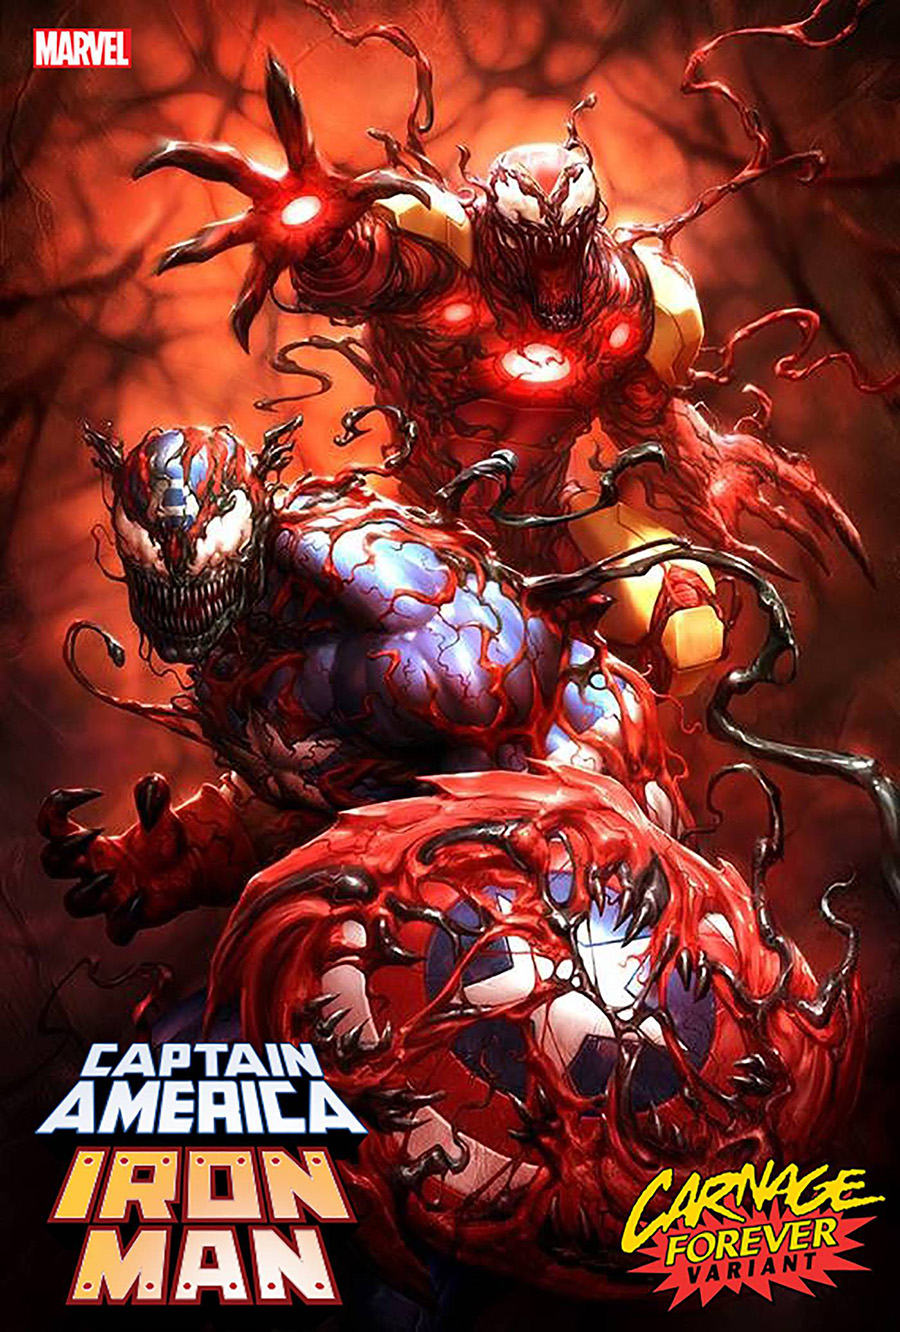 Captain America Iron Man #5 Cover B Variant Kendrick kunkka Lim Carnage Forever Cover